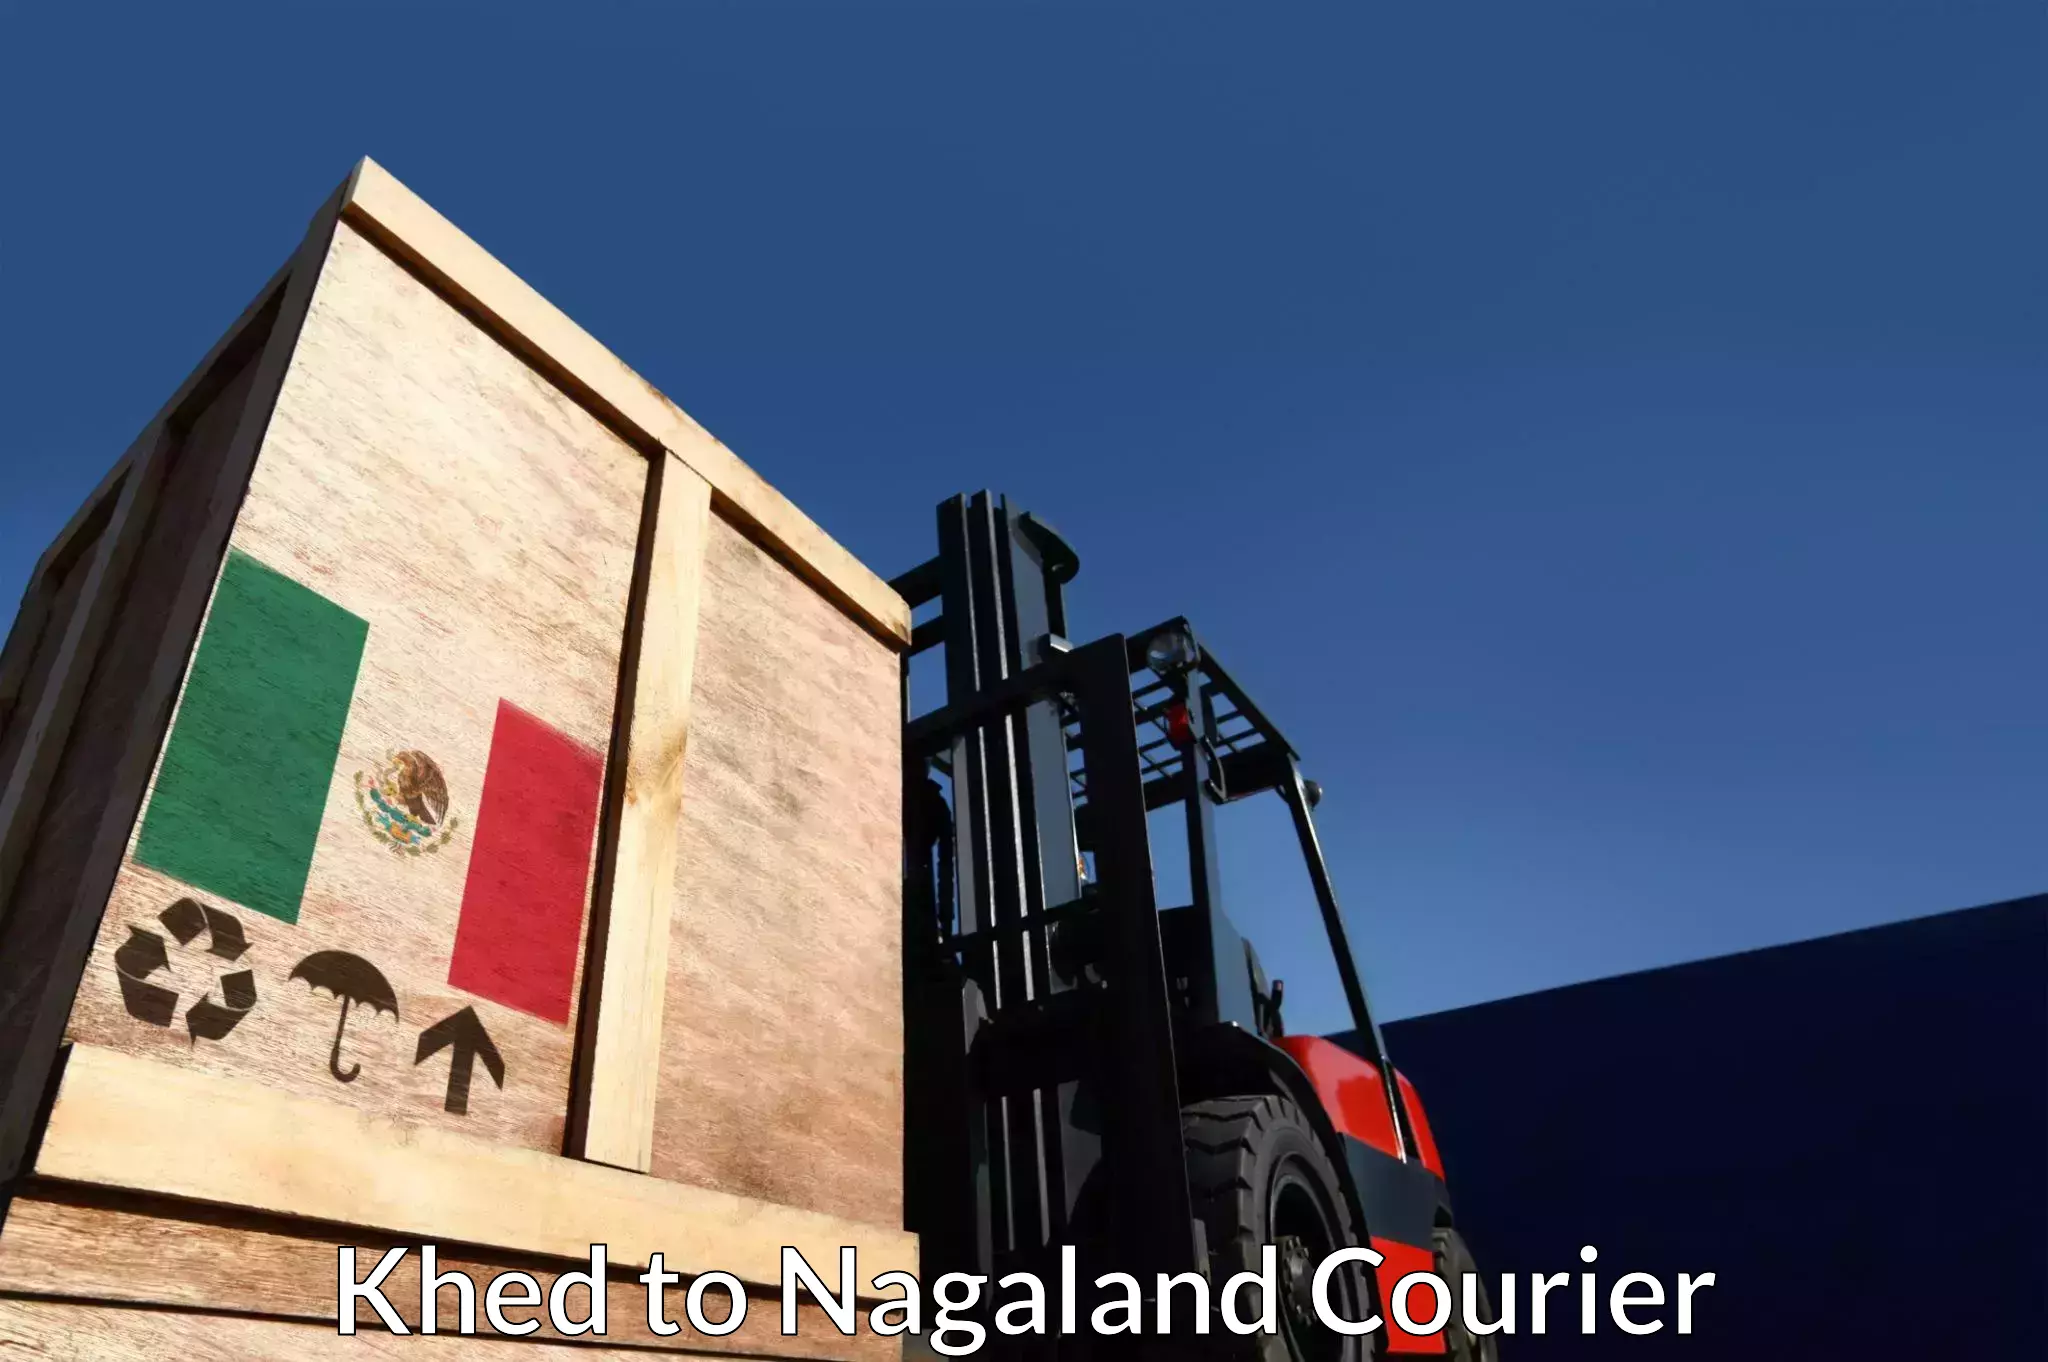 Nationwide parcel services Khed to Nagaland